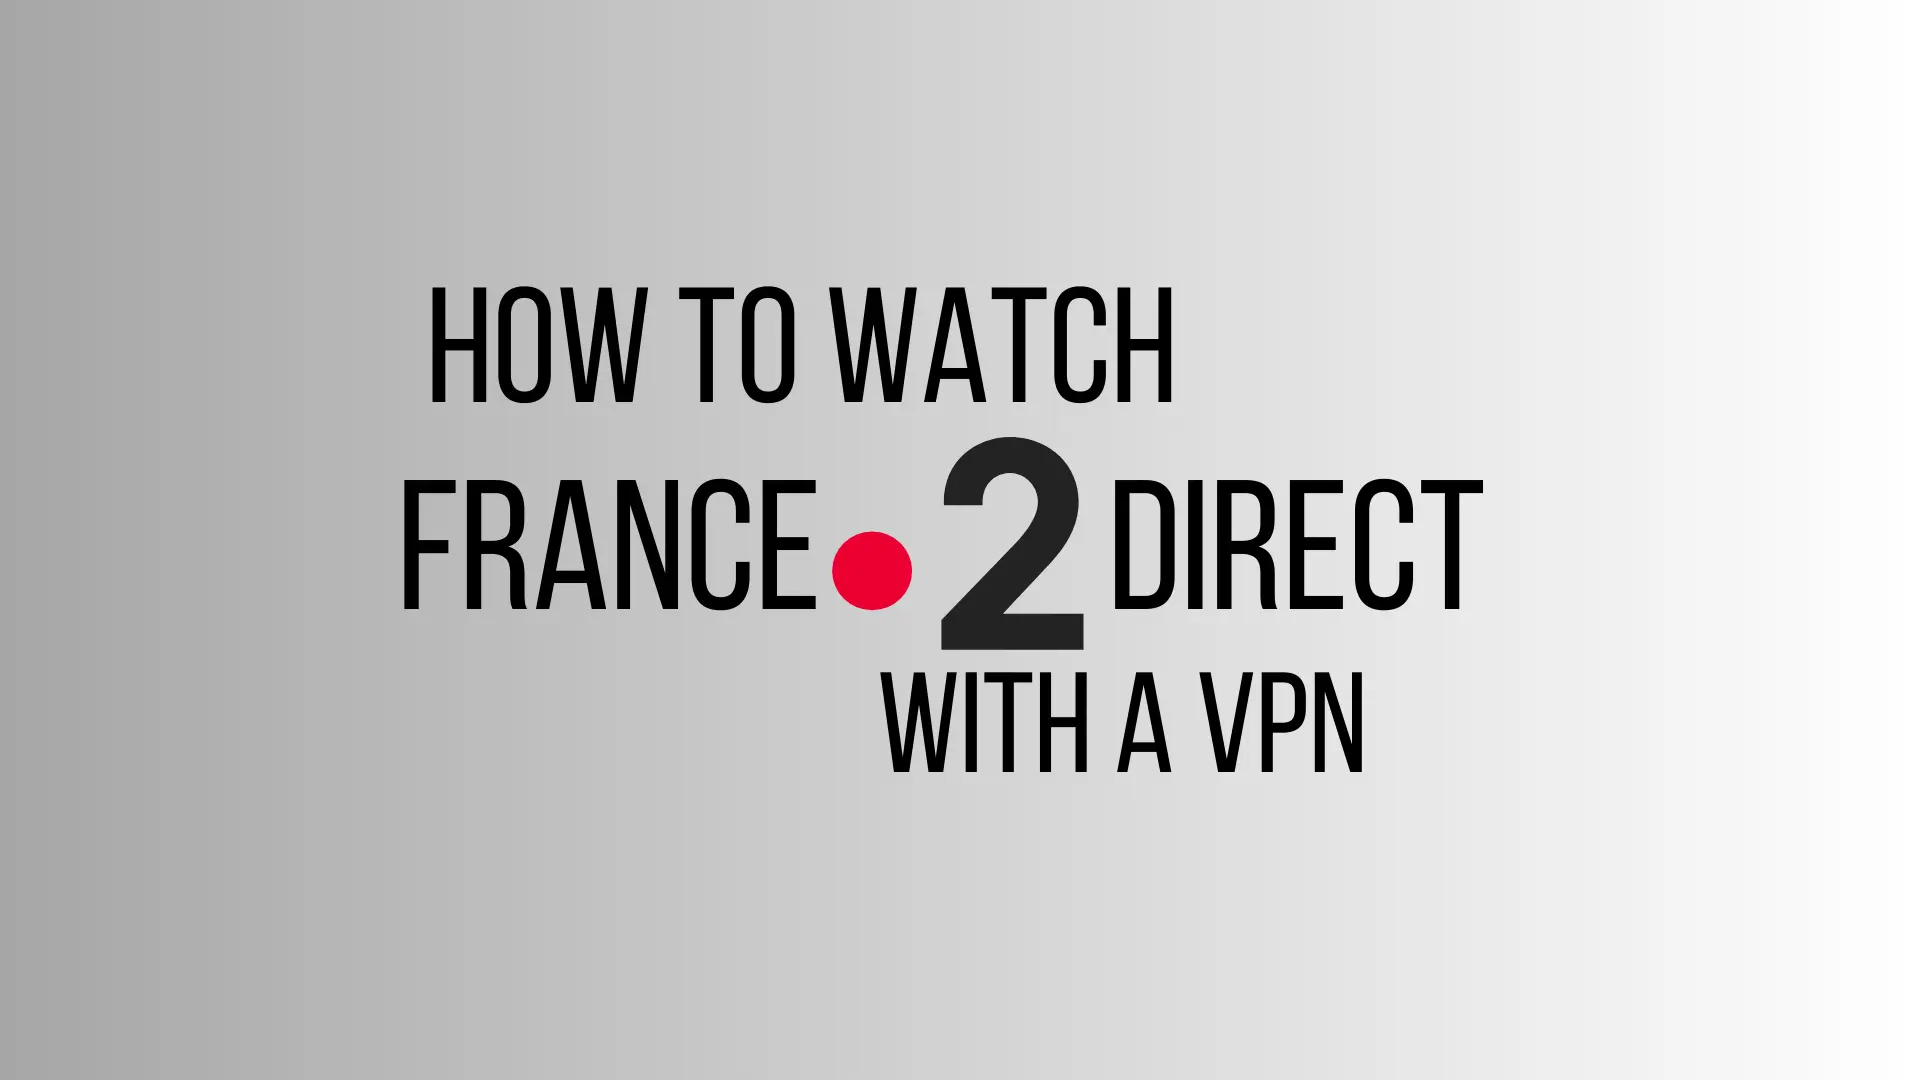 How to Watch France 2 Direct with a VPN [And Best VPNs to Use]